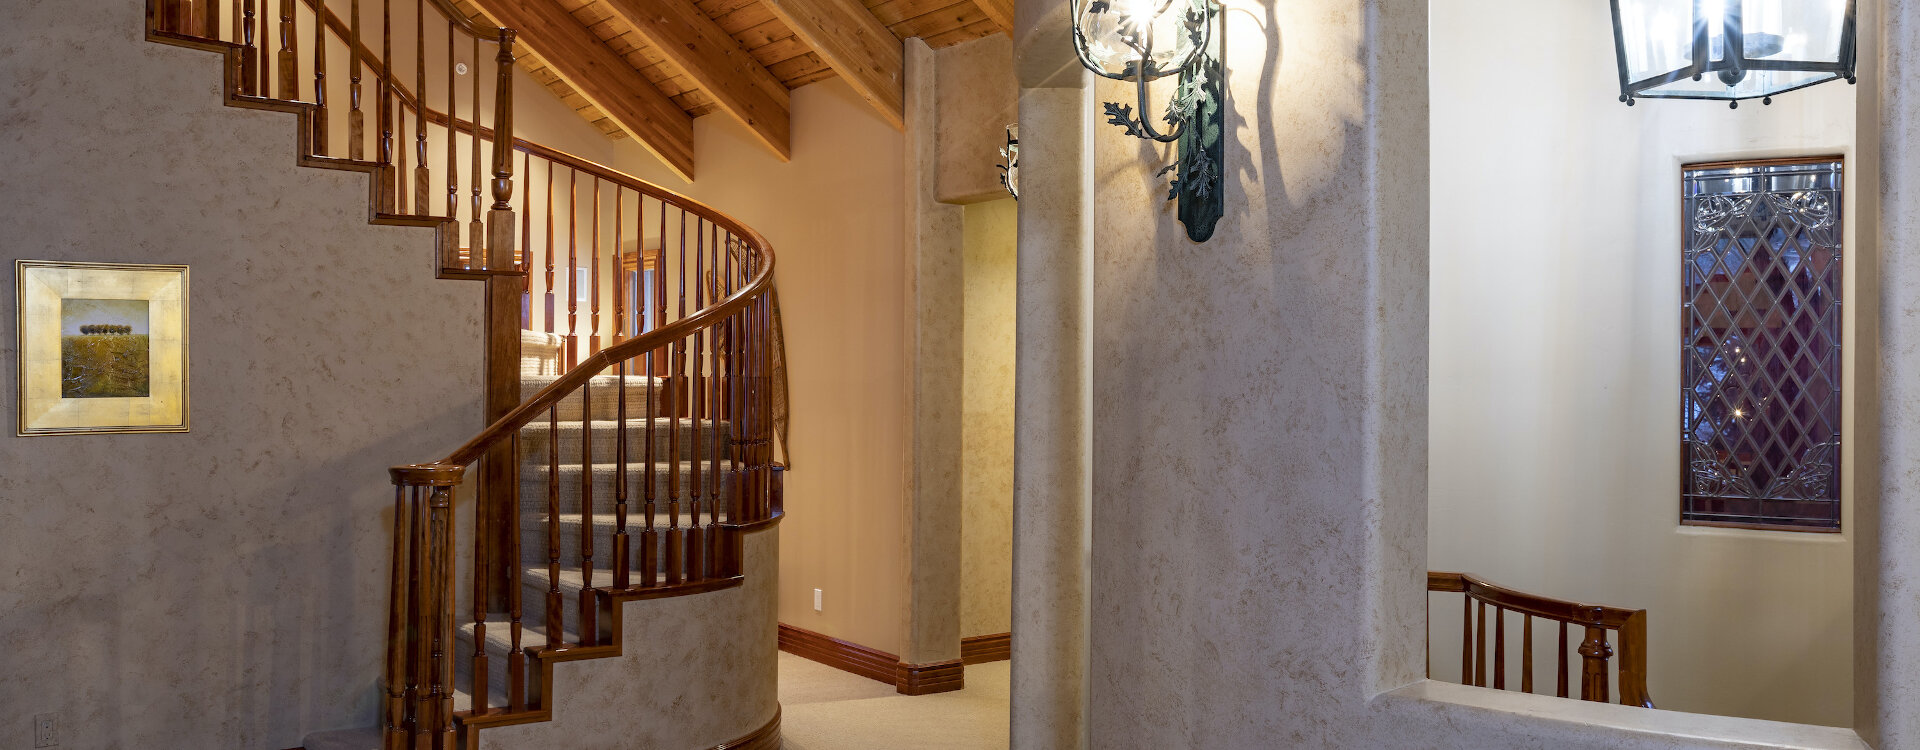 1.19-telluride-gold-hill-Upstairs-Detail